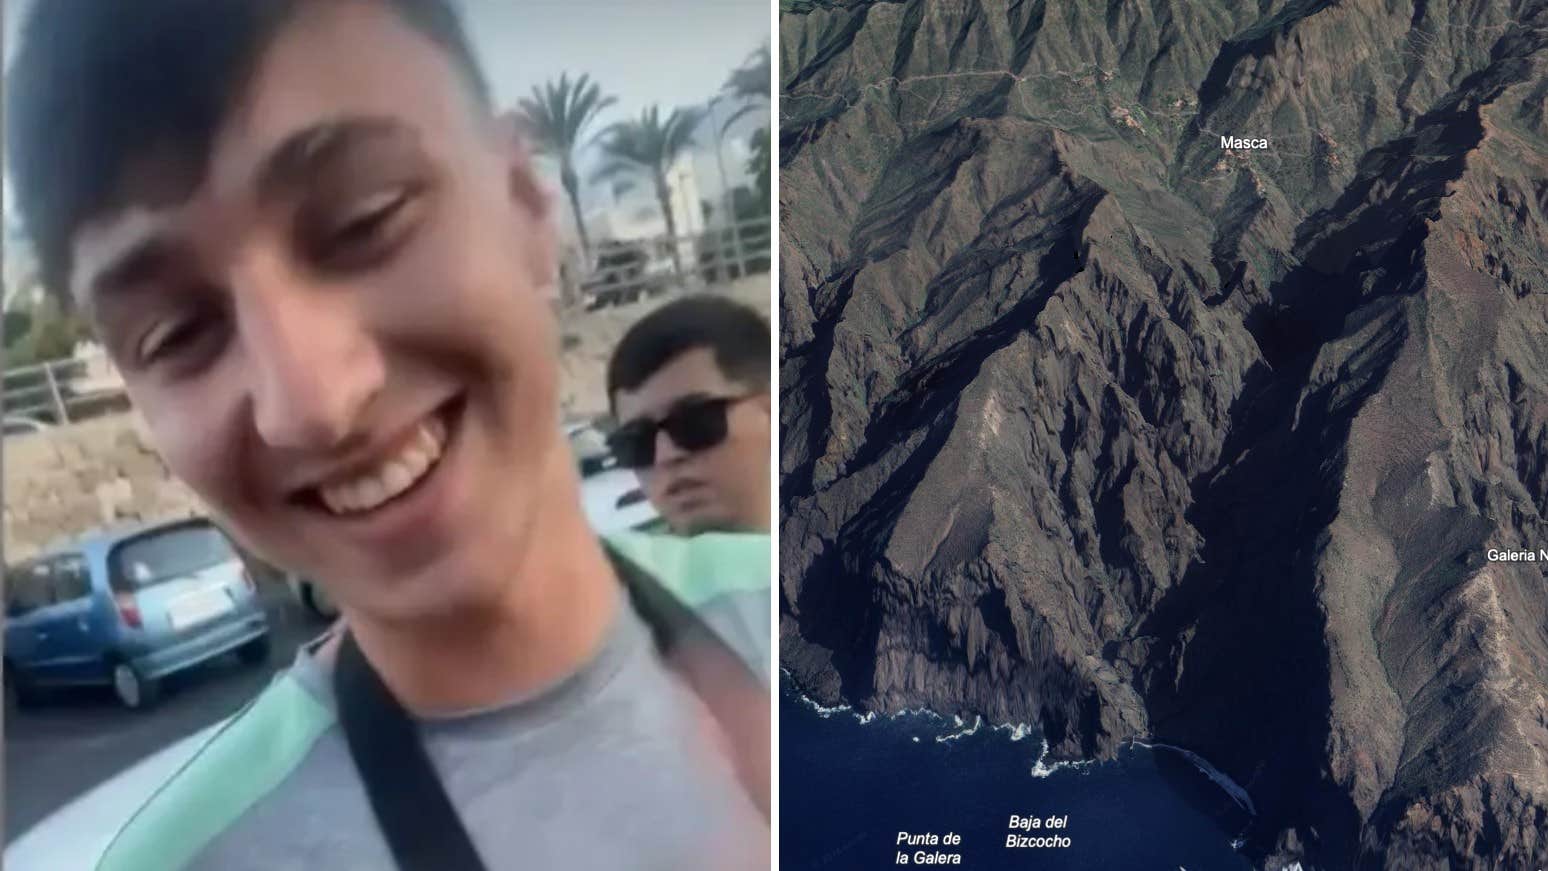 Search efforts for the missing 19-year-old in Tenerife |  the world